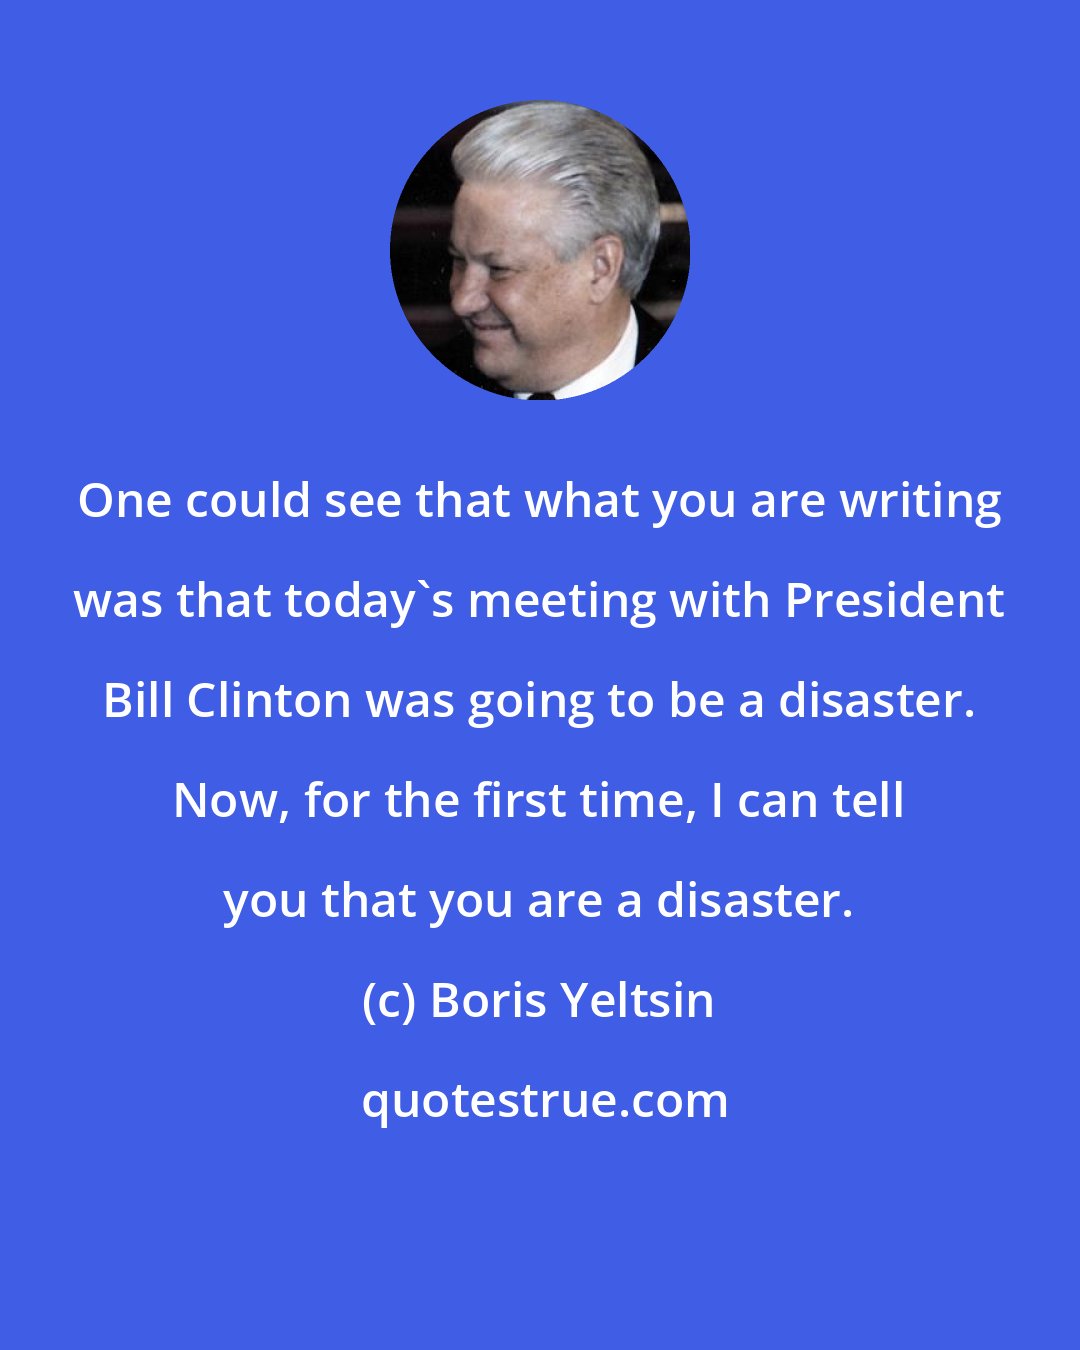 Boris Yeltsin: One could see that what you are writing was that today's meeting with President Bill Clinton was going to be a disaster. Now, for the first time, I can tell you that you are a disaster.